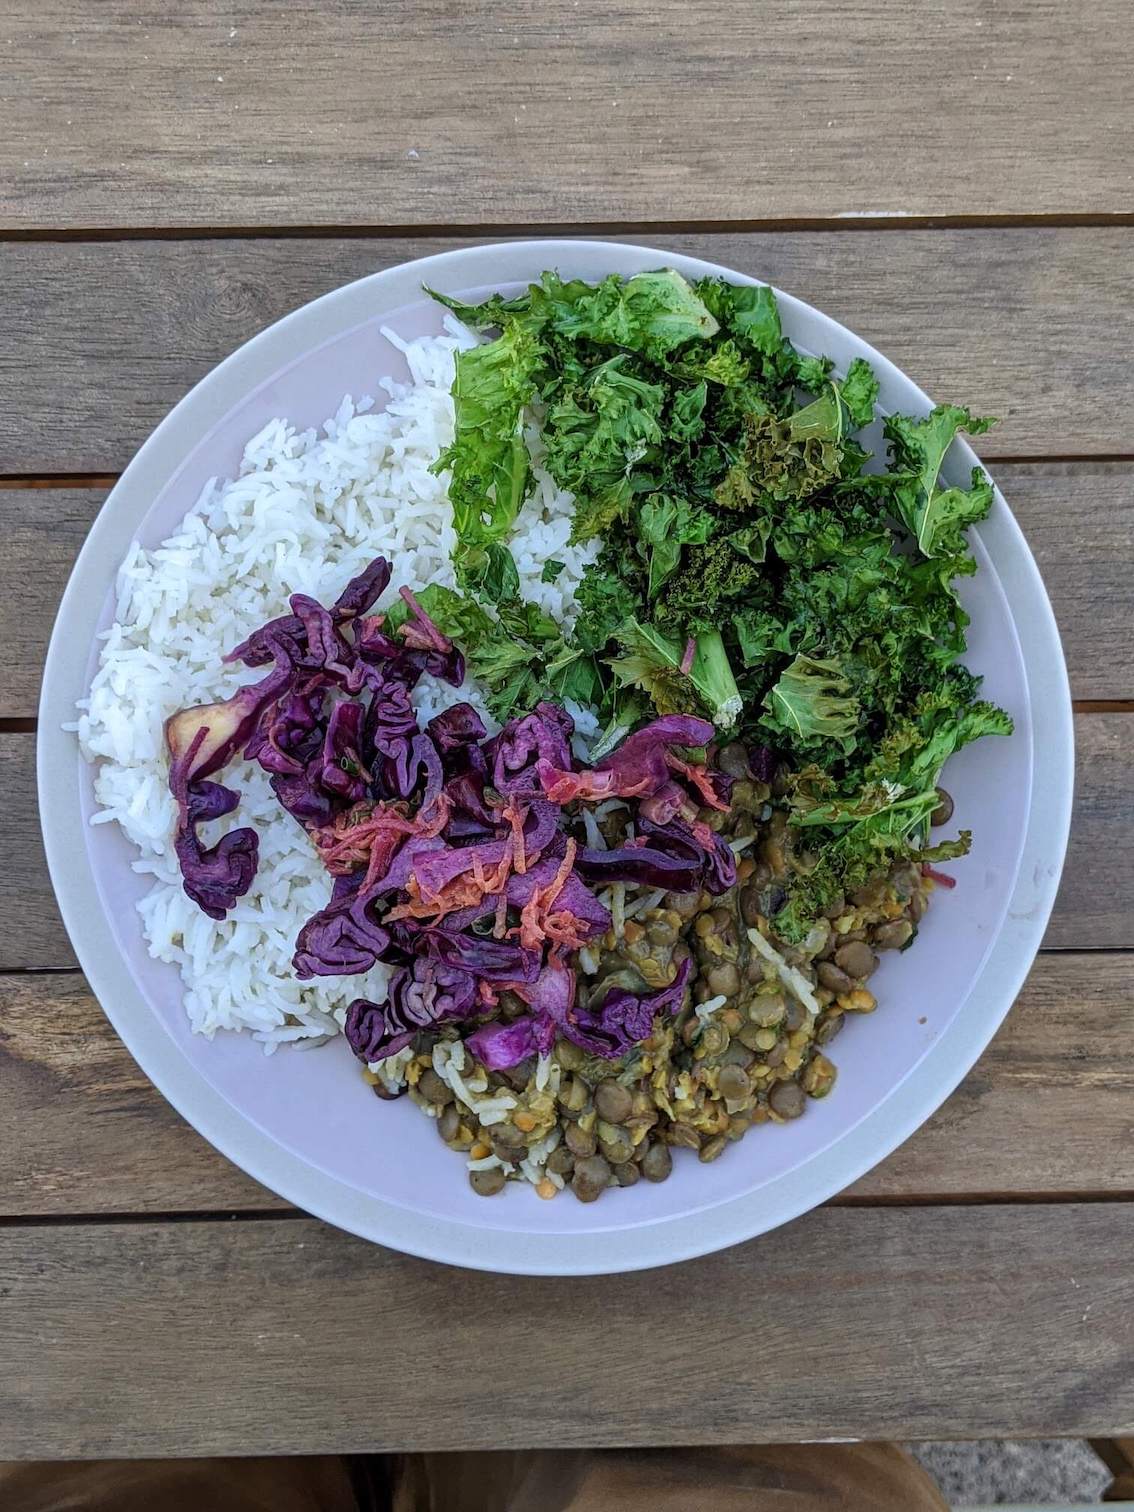 Daal, rice, cripsy kale and coleslaw